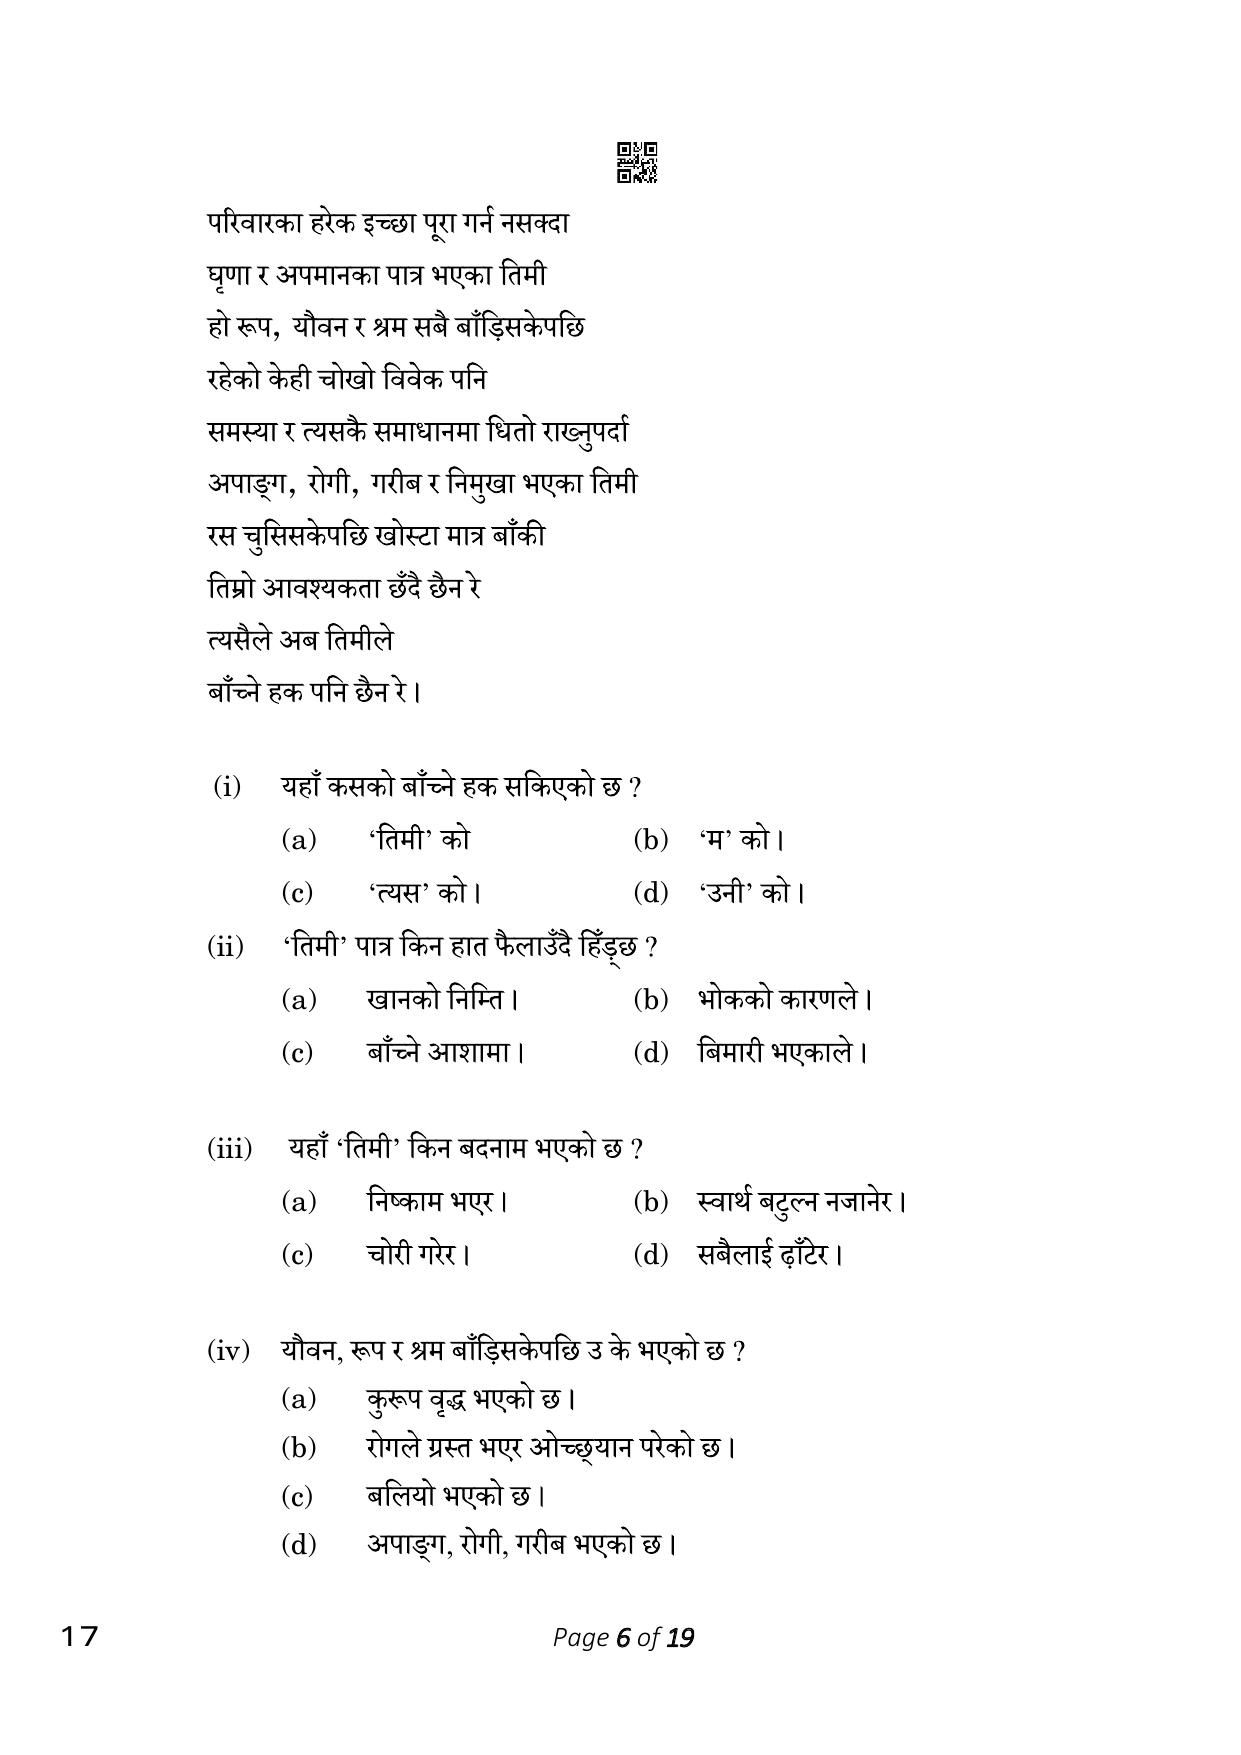 CBSE Class 10 Nepali (Compartment) 2023 Question Paper - Page 6